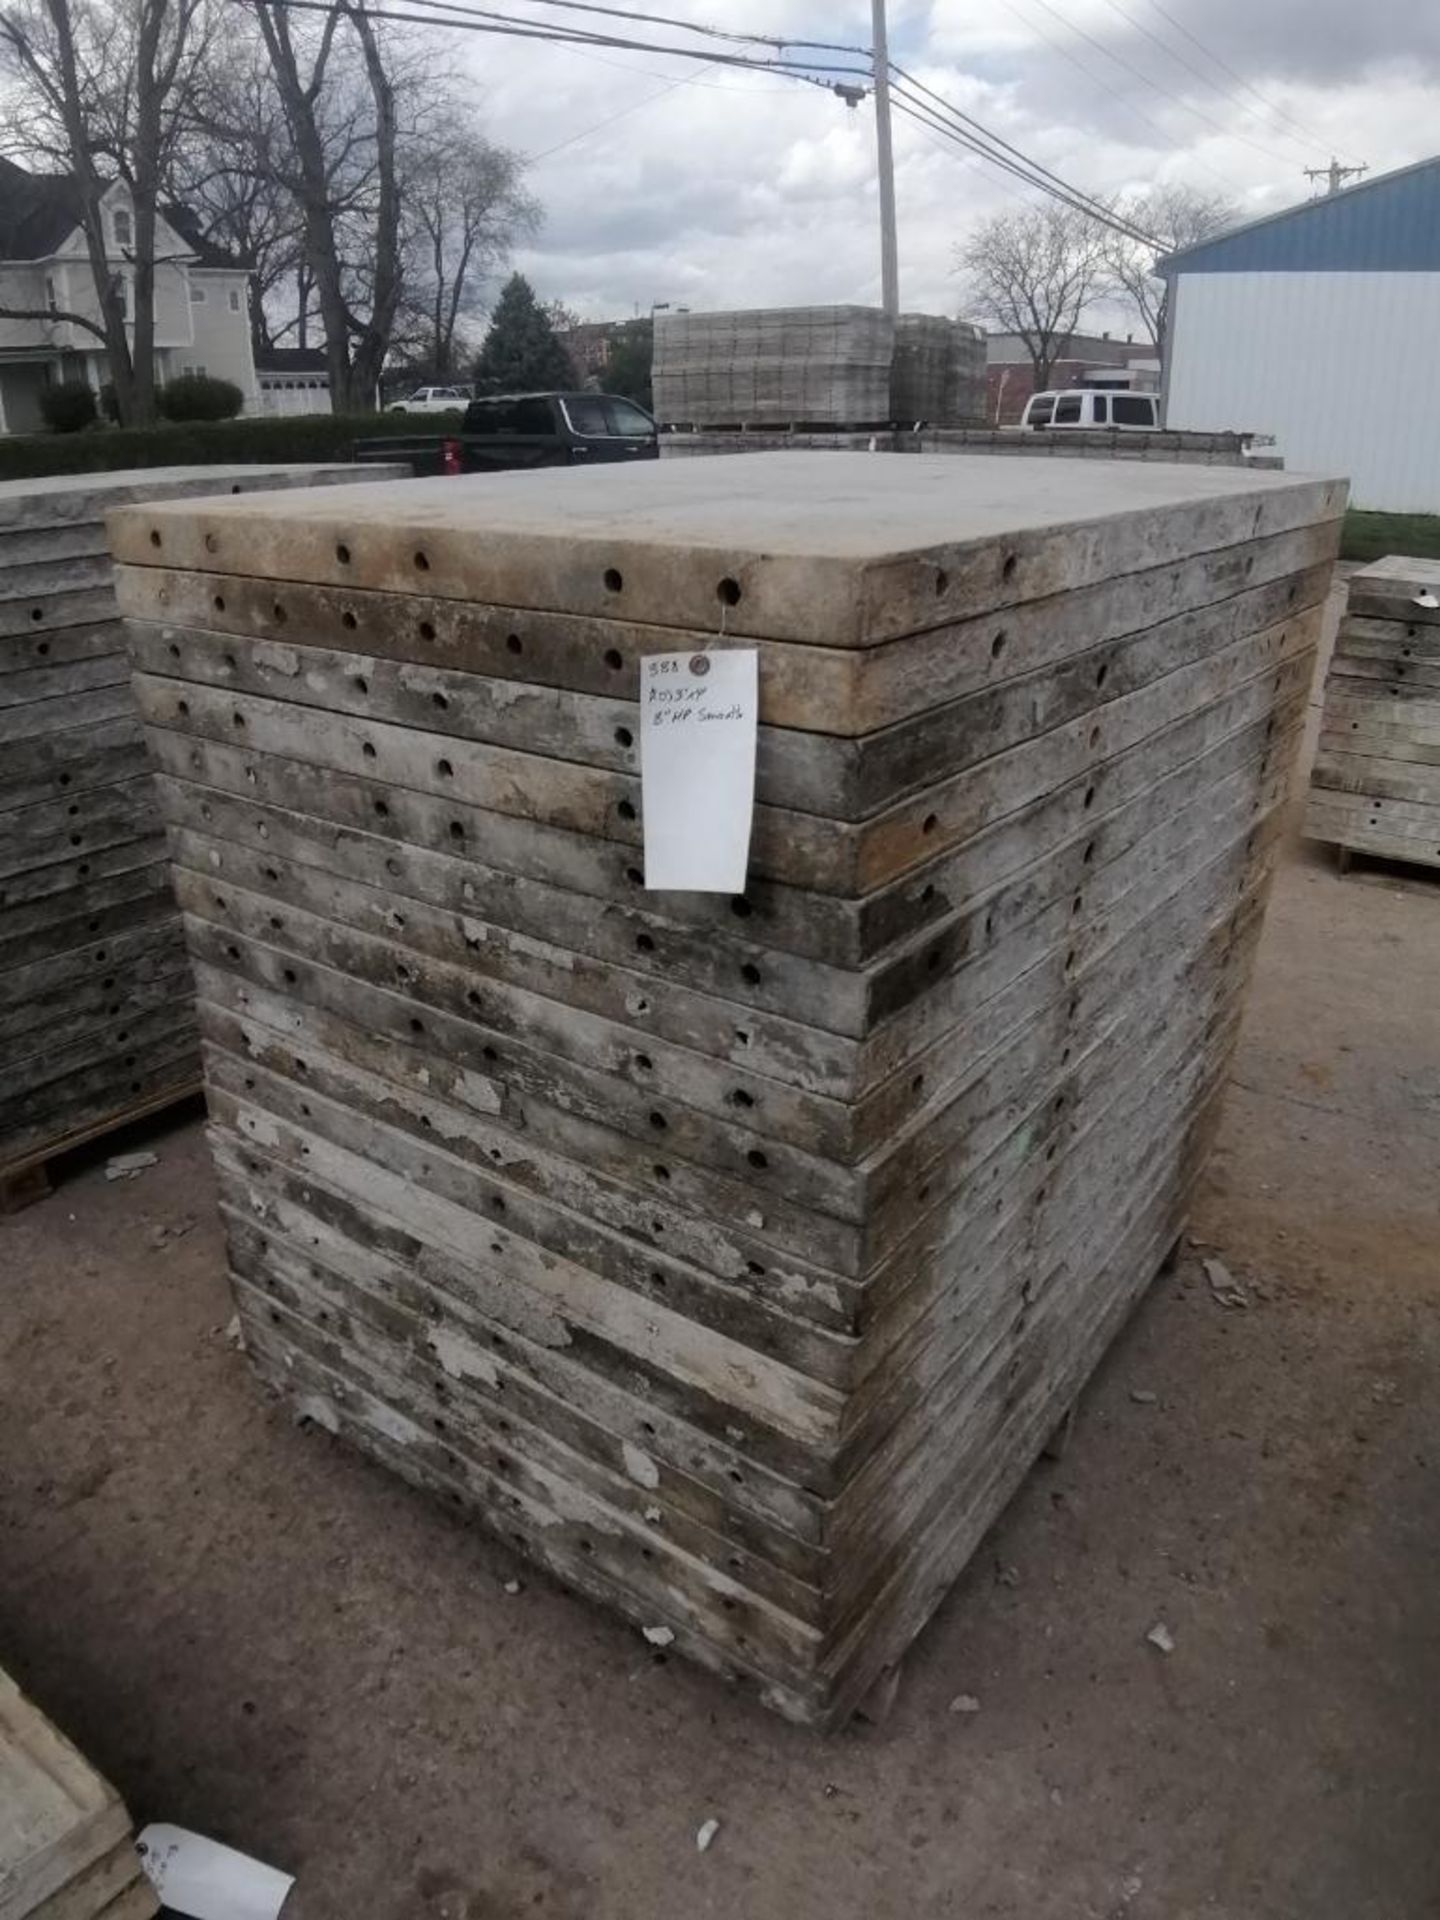 (20) 3' x 4' Wall-Ties Smooth Aluminum Concrete Forms 8" Hole Pattern. Located in Mt. Pleasant, IA.